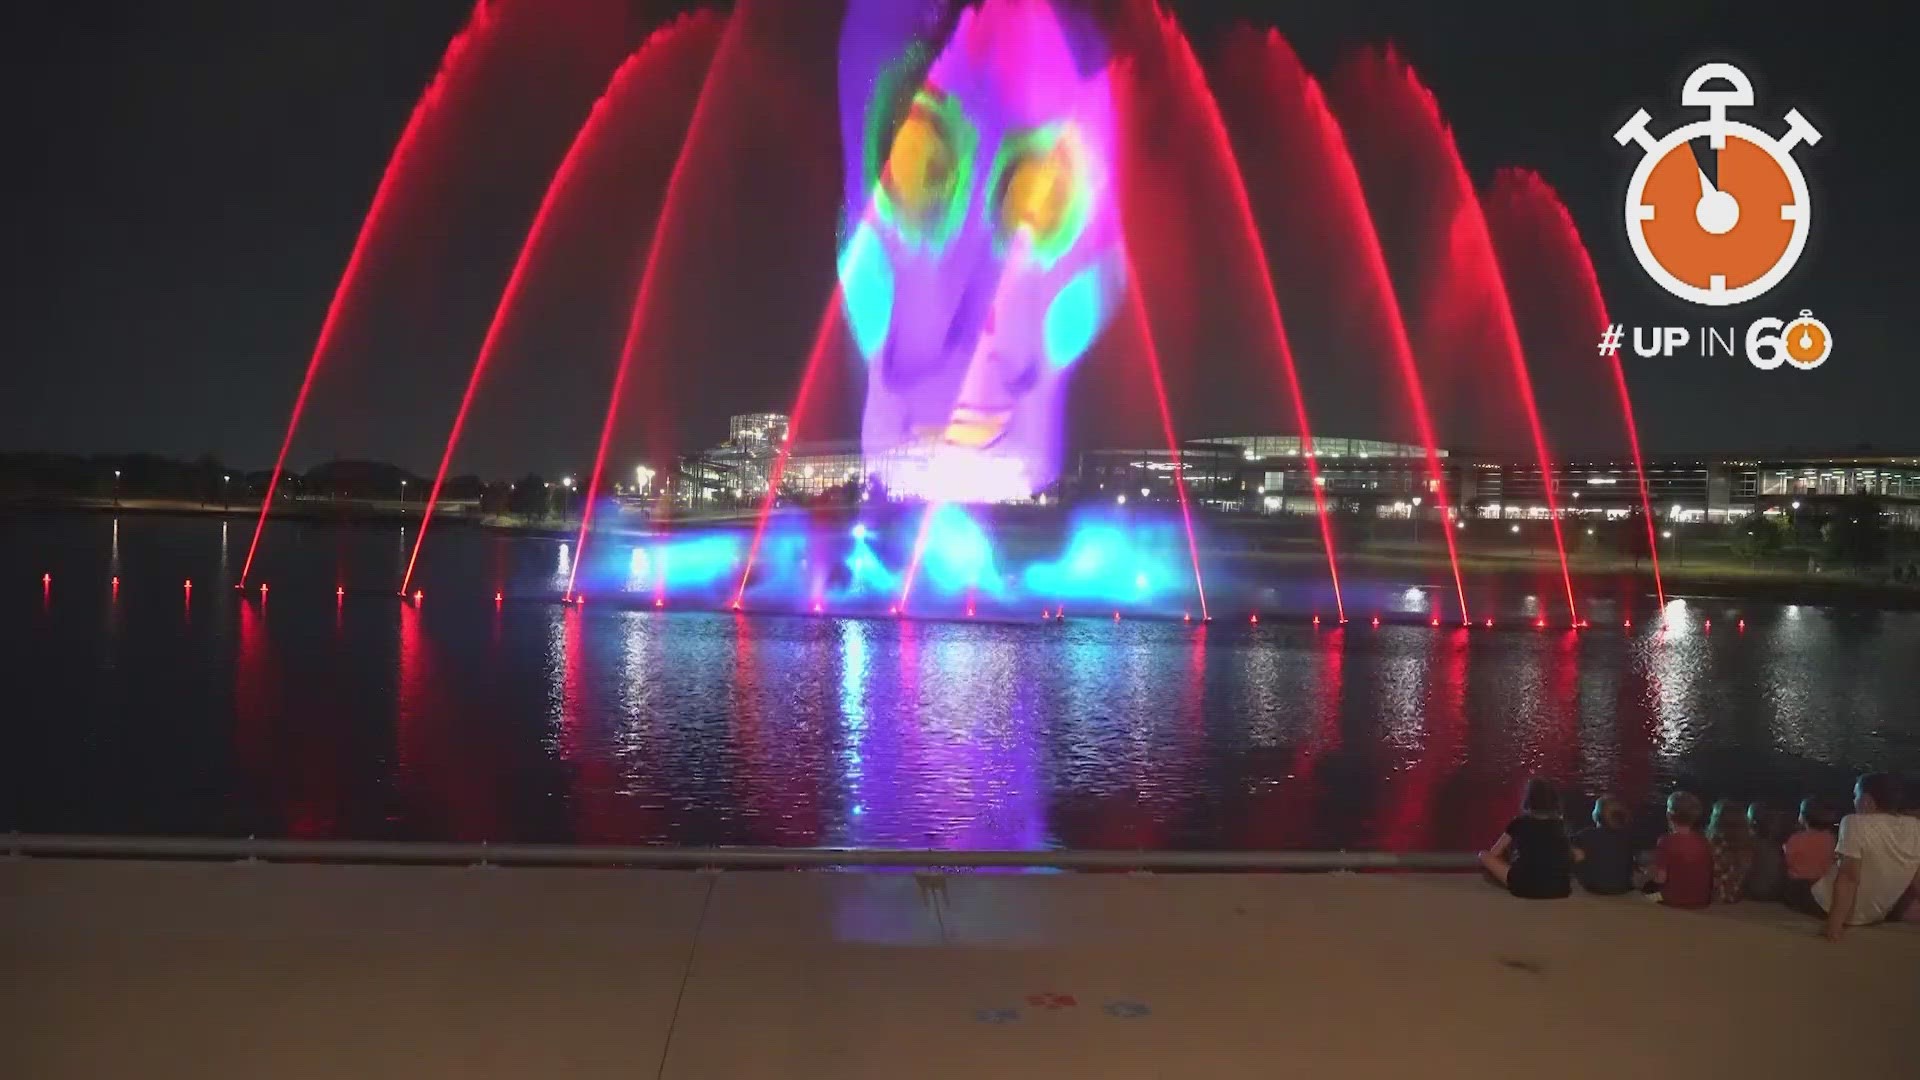 The show uses the same type of equipment as the water show at the Bellagio in Las Vegas